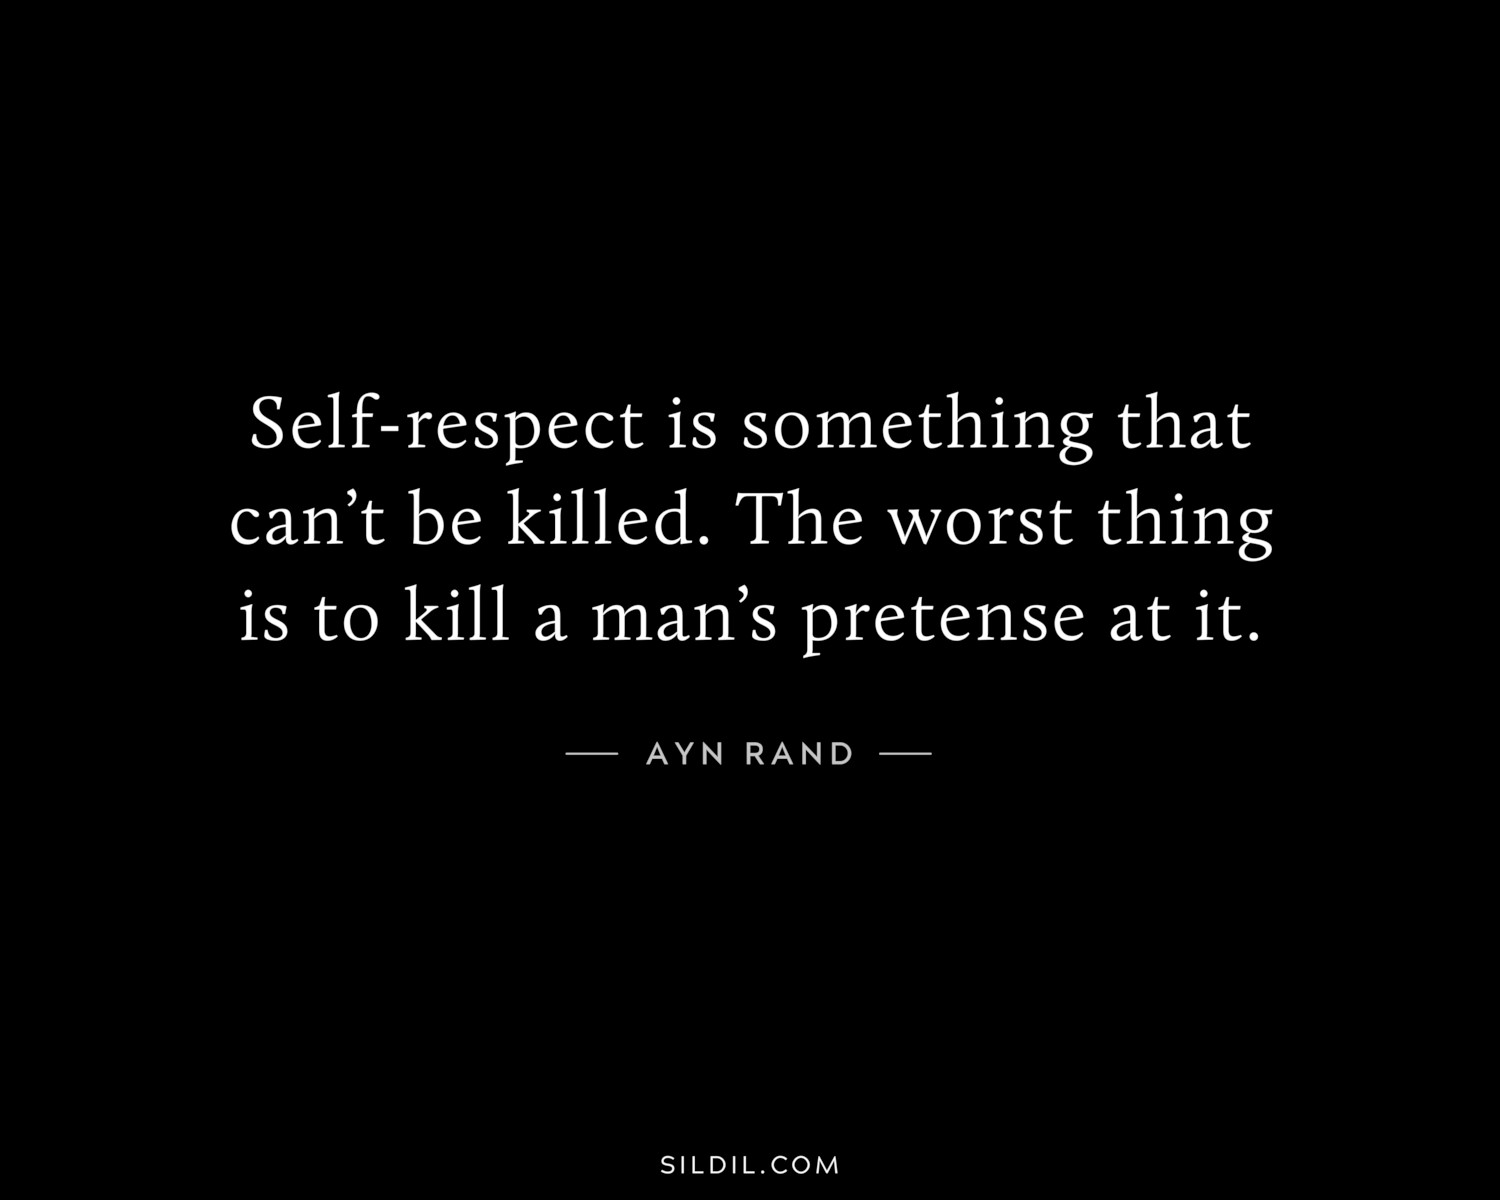 Self-respect is something that can’t be killed. The worst thing is to kill a man’s pretense at it.